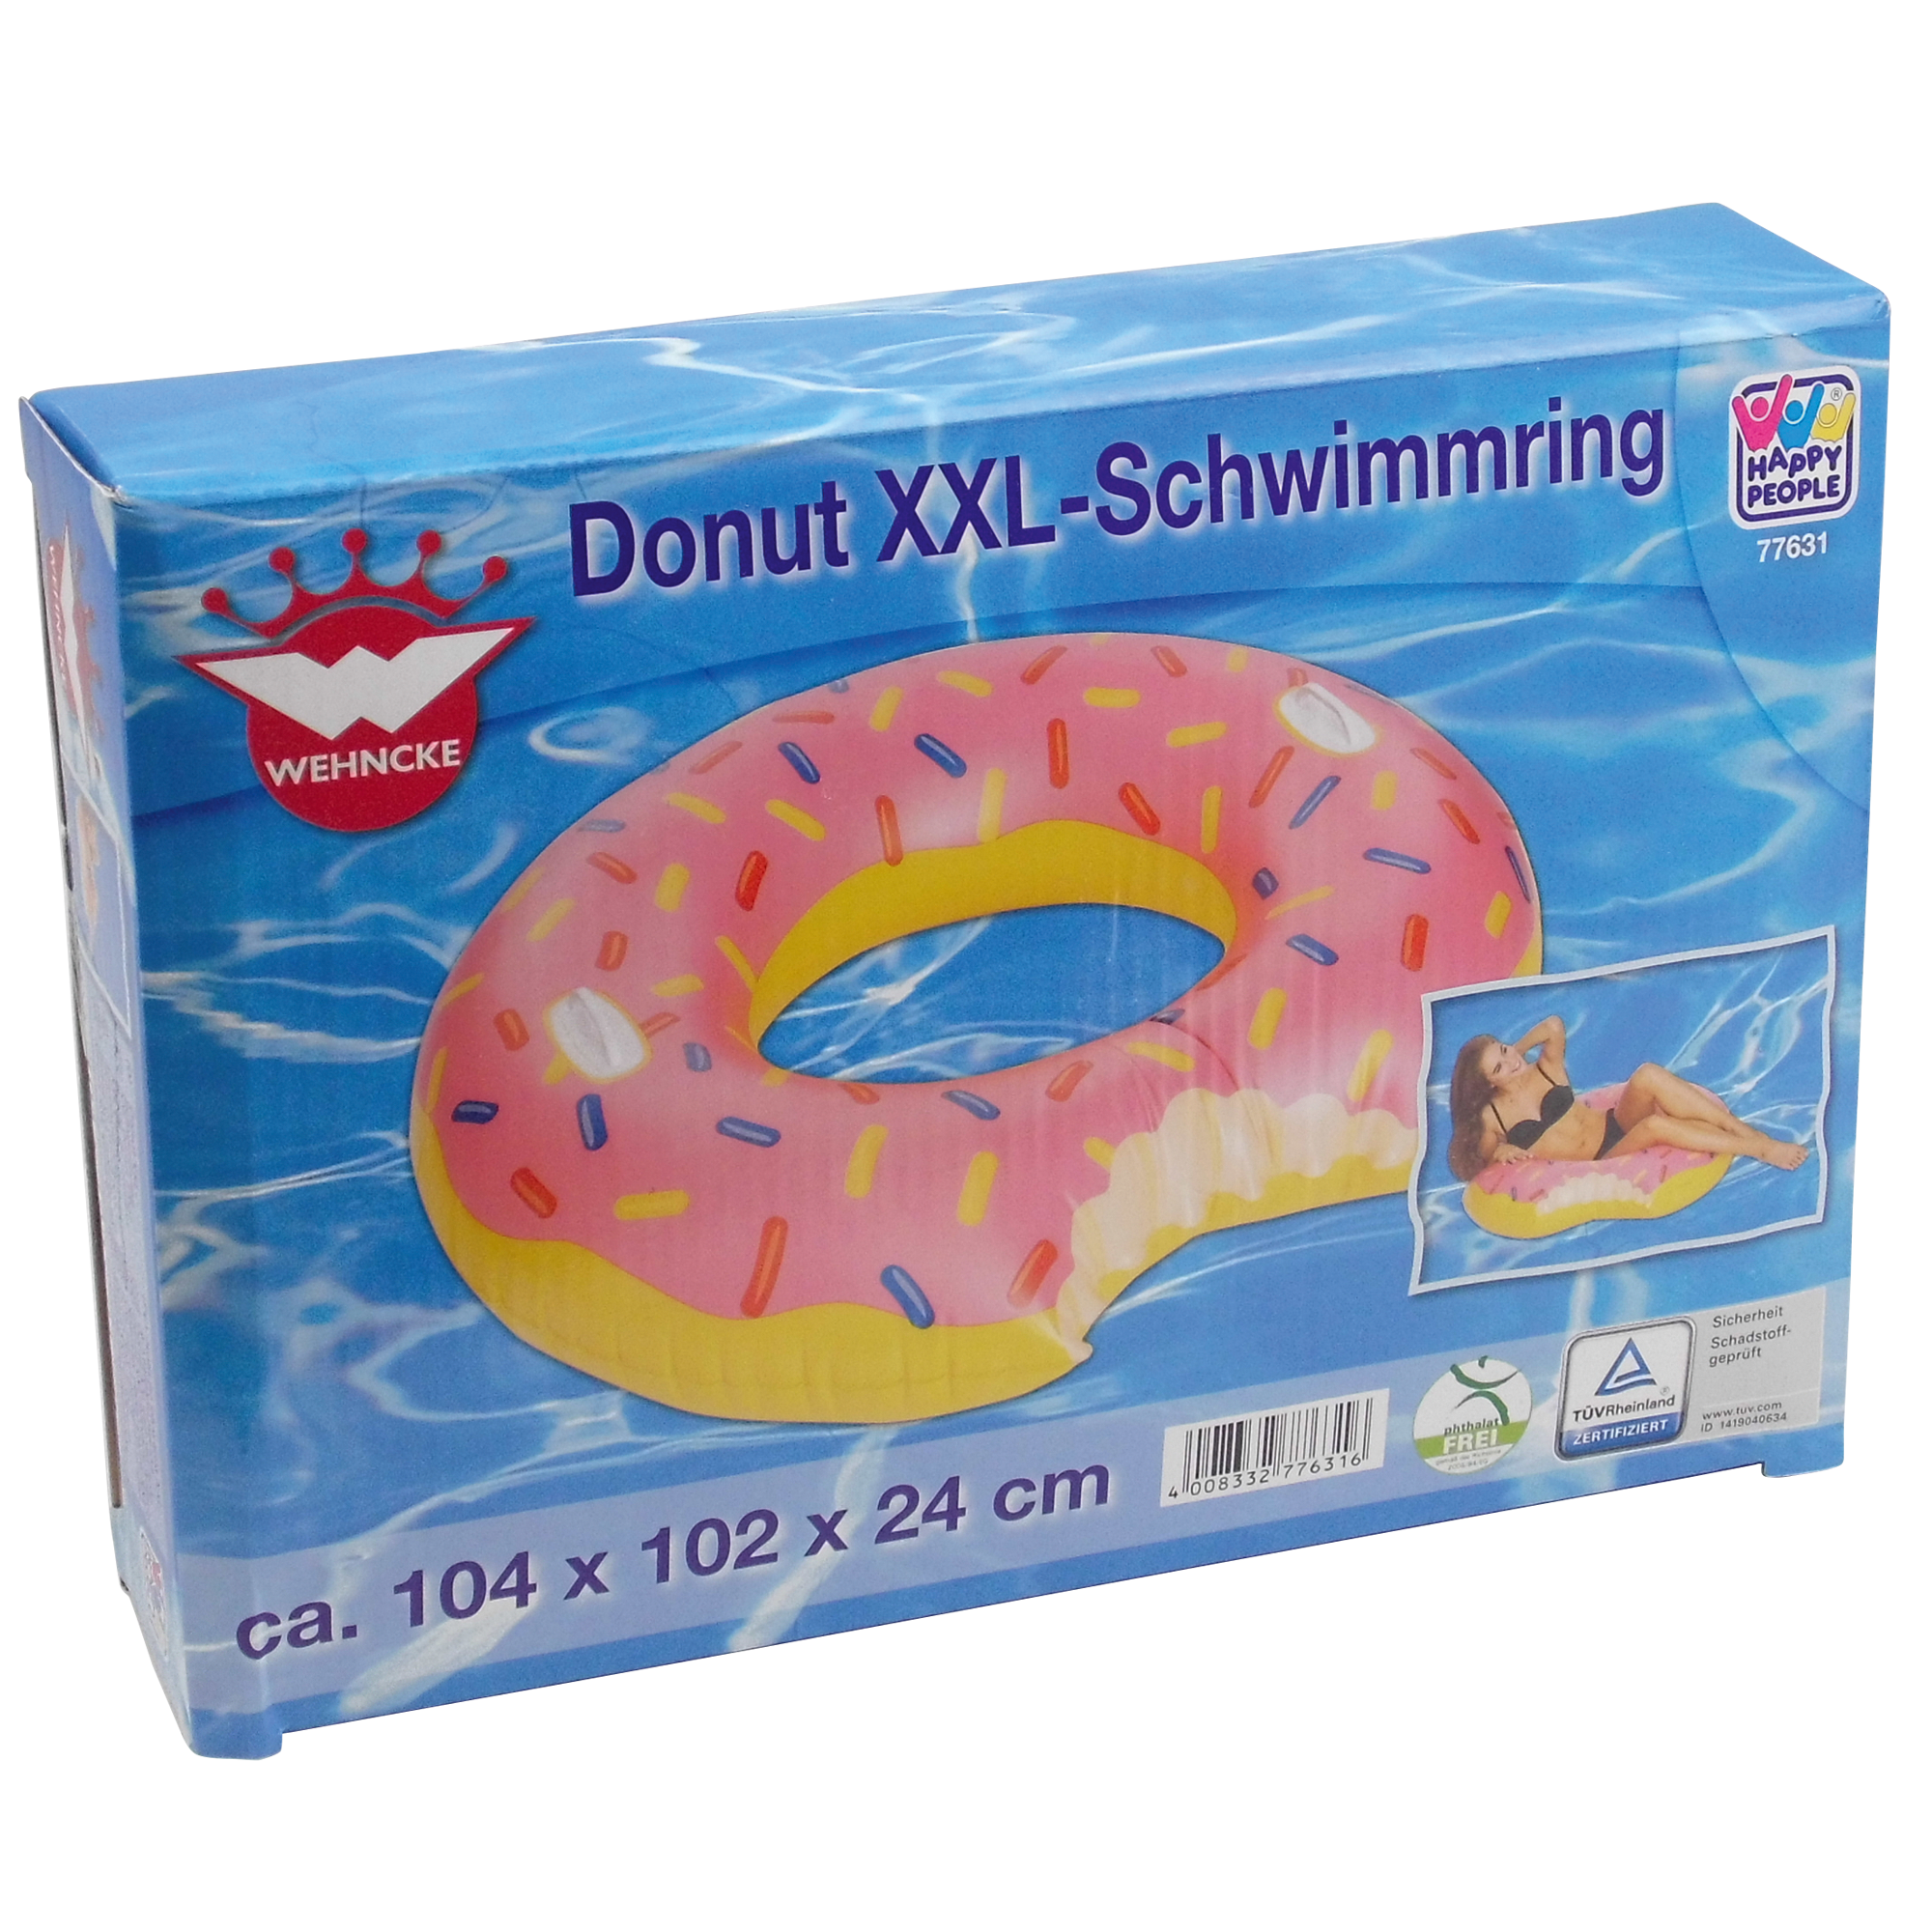 Schwimmring 'Donut' 104 x 24 x 102 cm + product picture